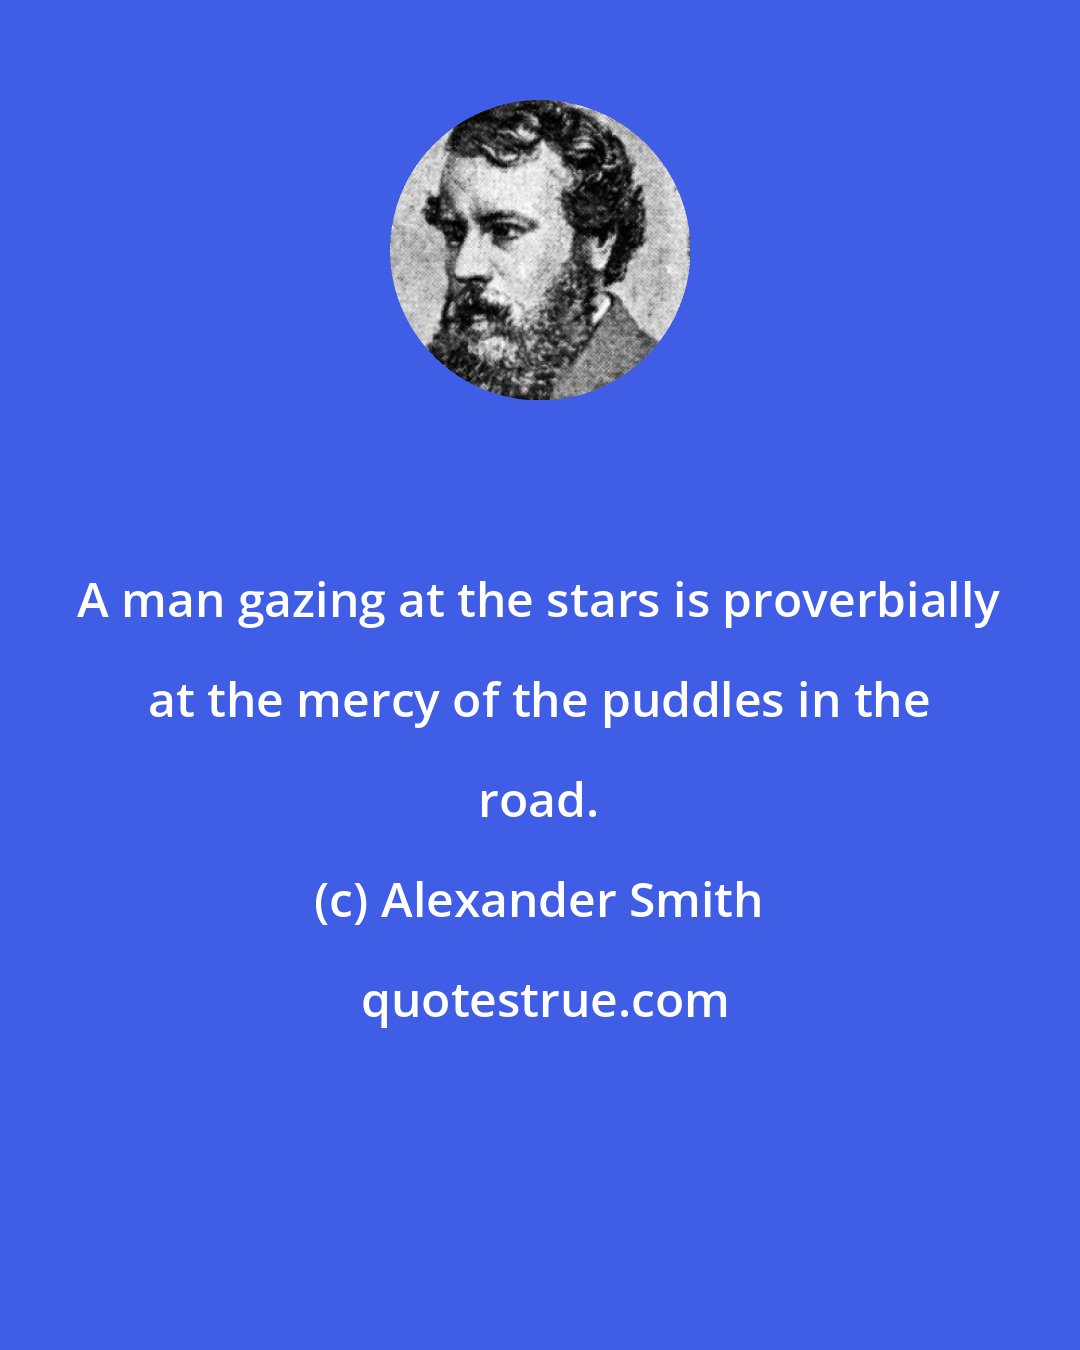 Alexander Smith: A man gazing at the stars is proverbially at the mercy of the puddles in the road.